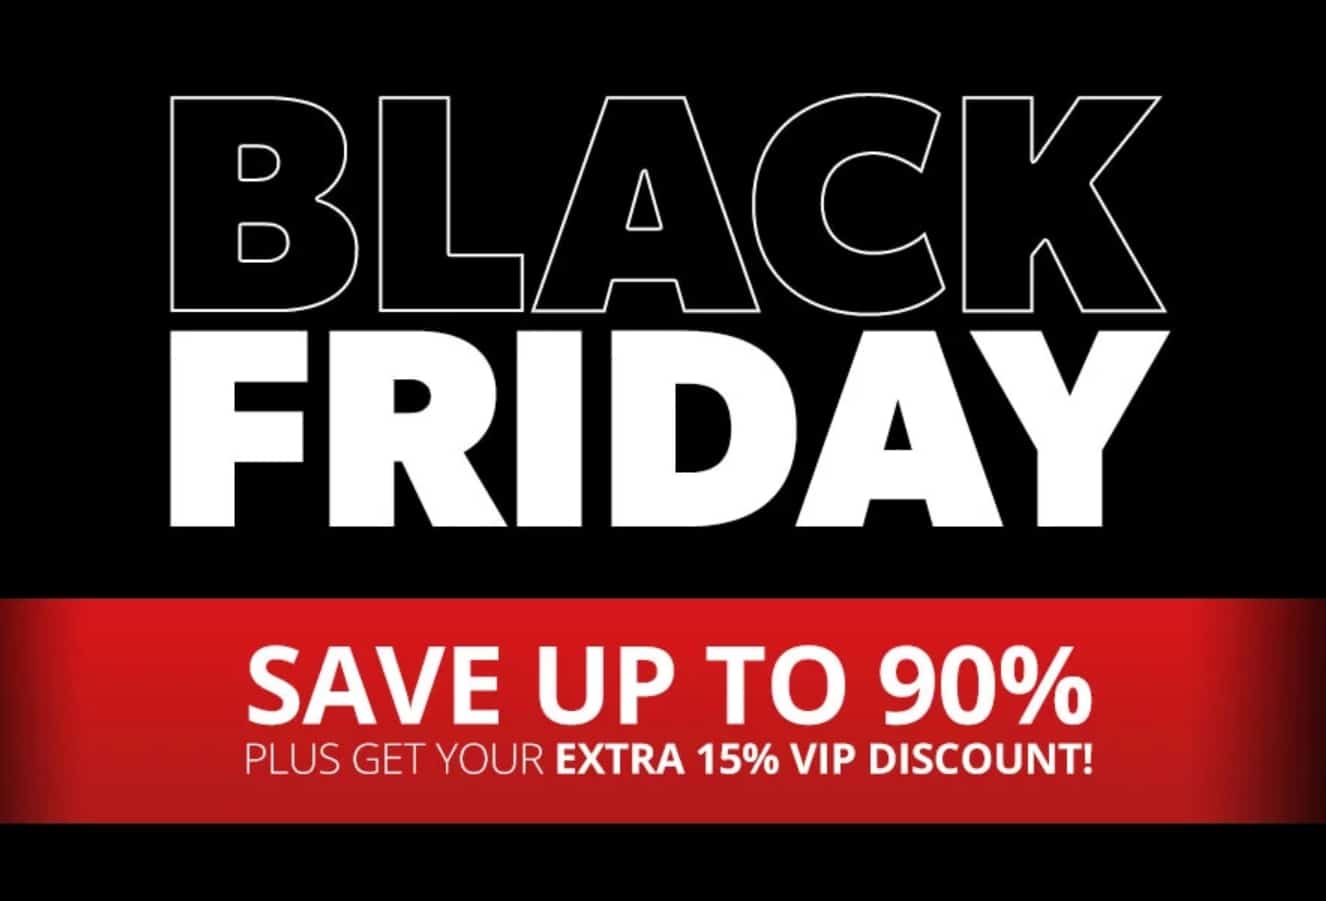 Black Friday 2019: Ultimate Deals Guide by TCP